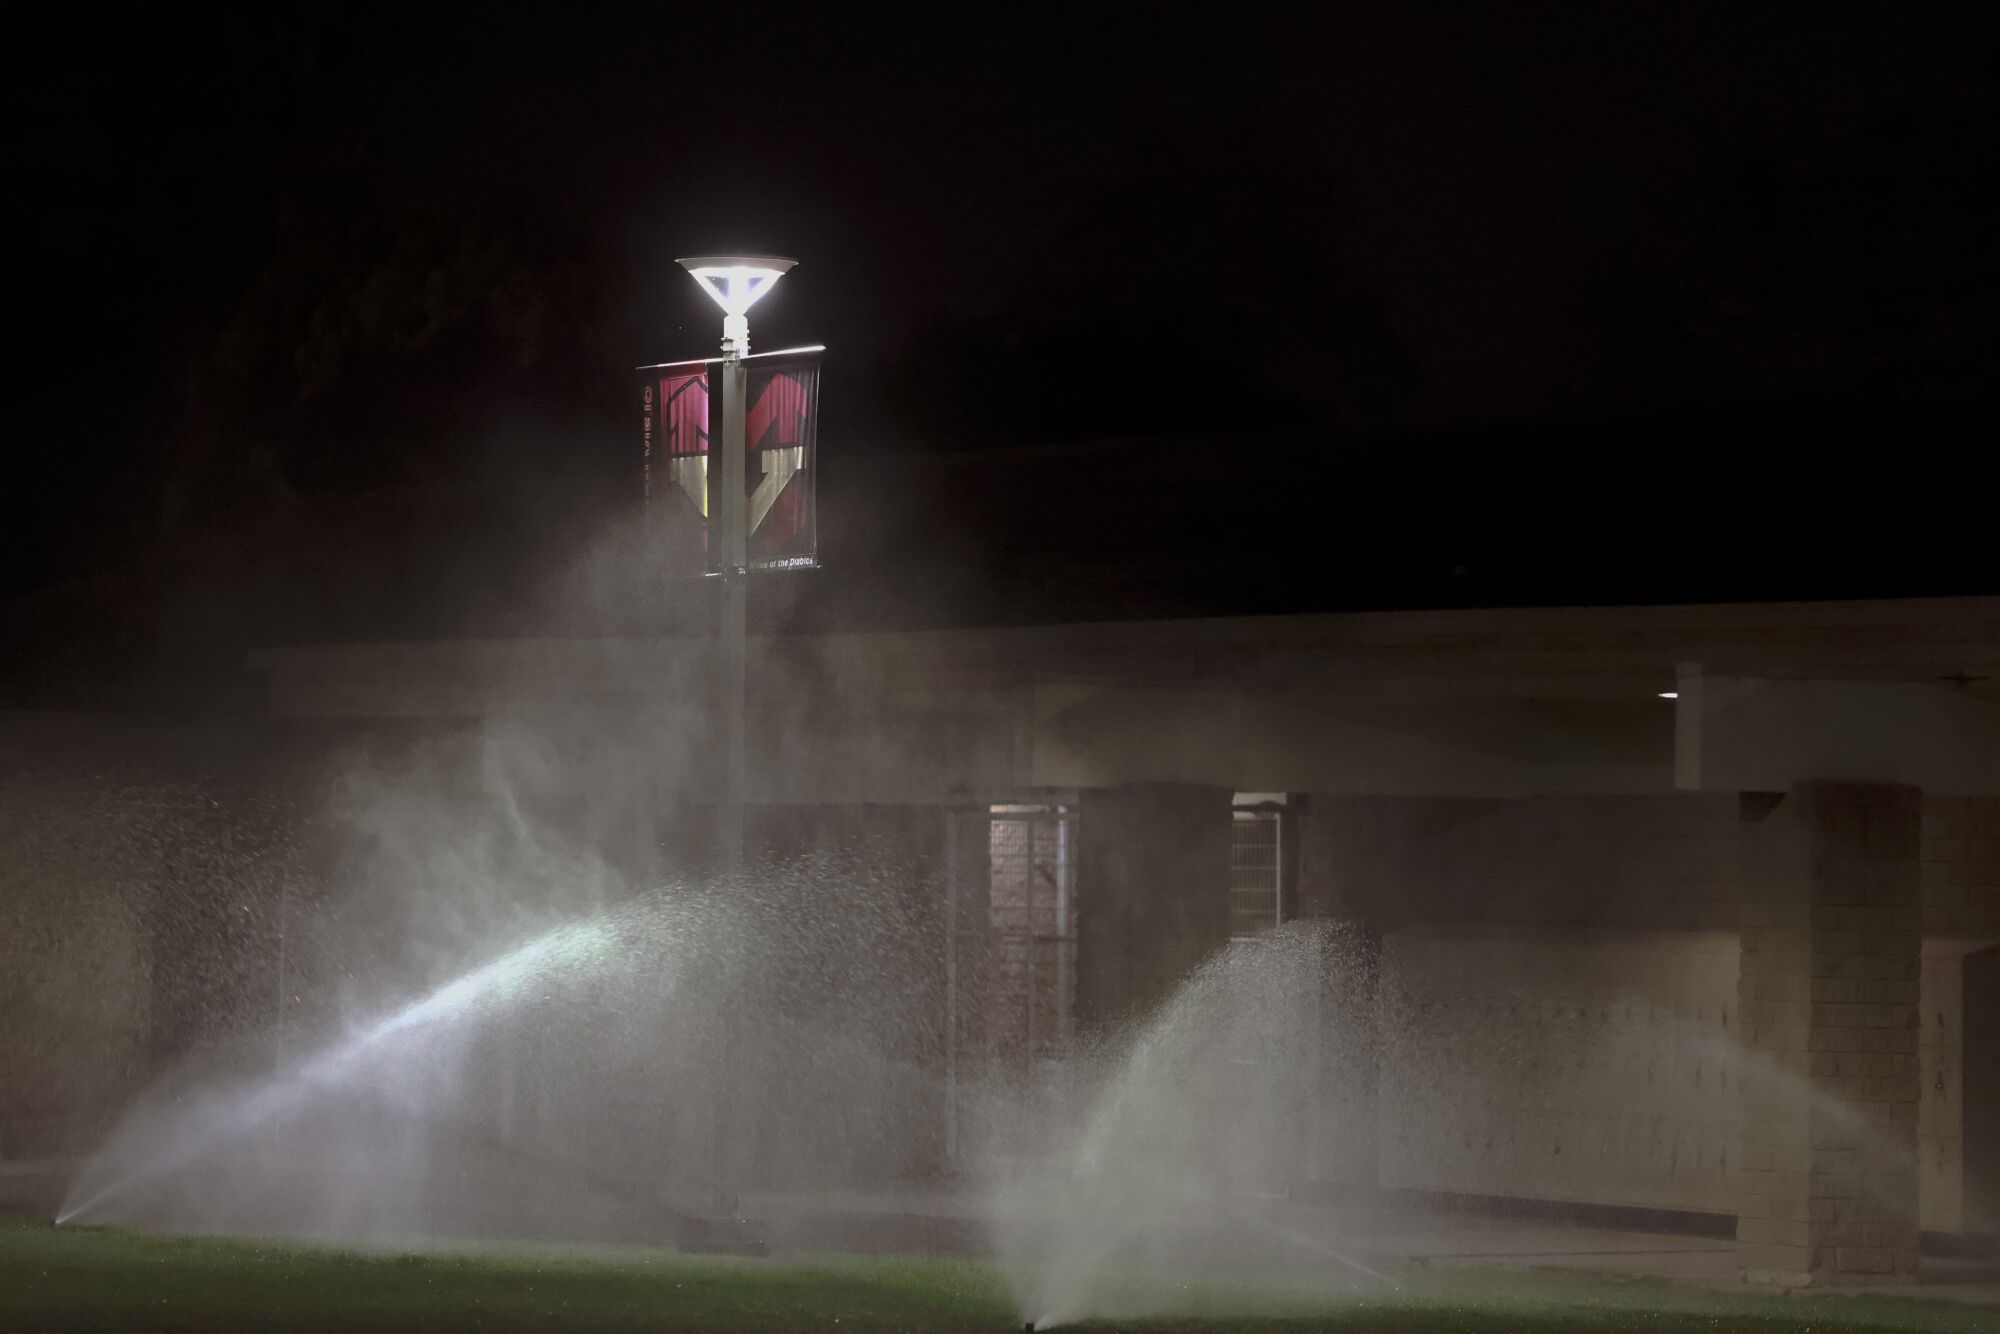 Sprinklers water the grass outside Mission Viejo High School at night